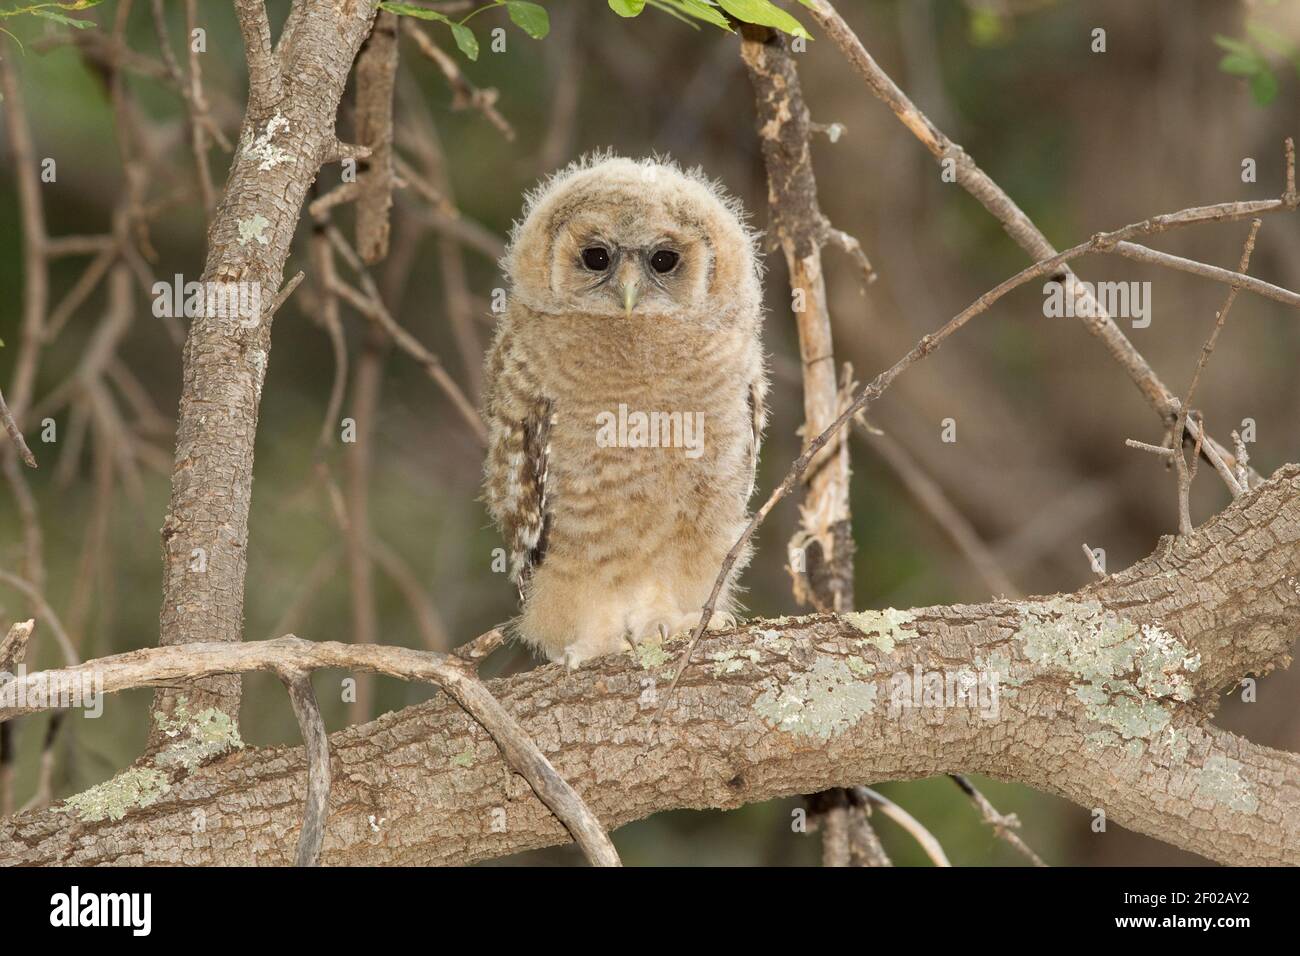 Mexican Spotted Owl fledgling, Strix occidentalis, first day out of the nest. Stock Photo